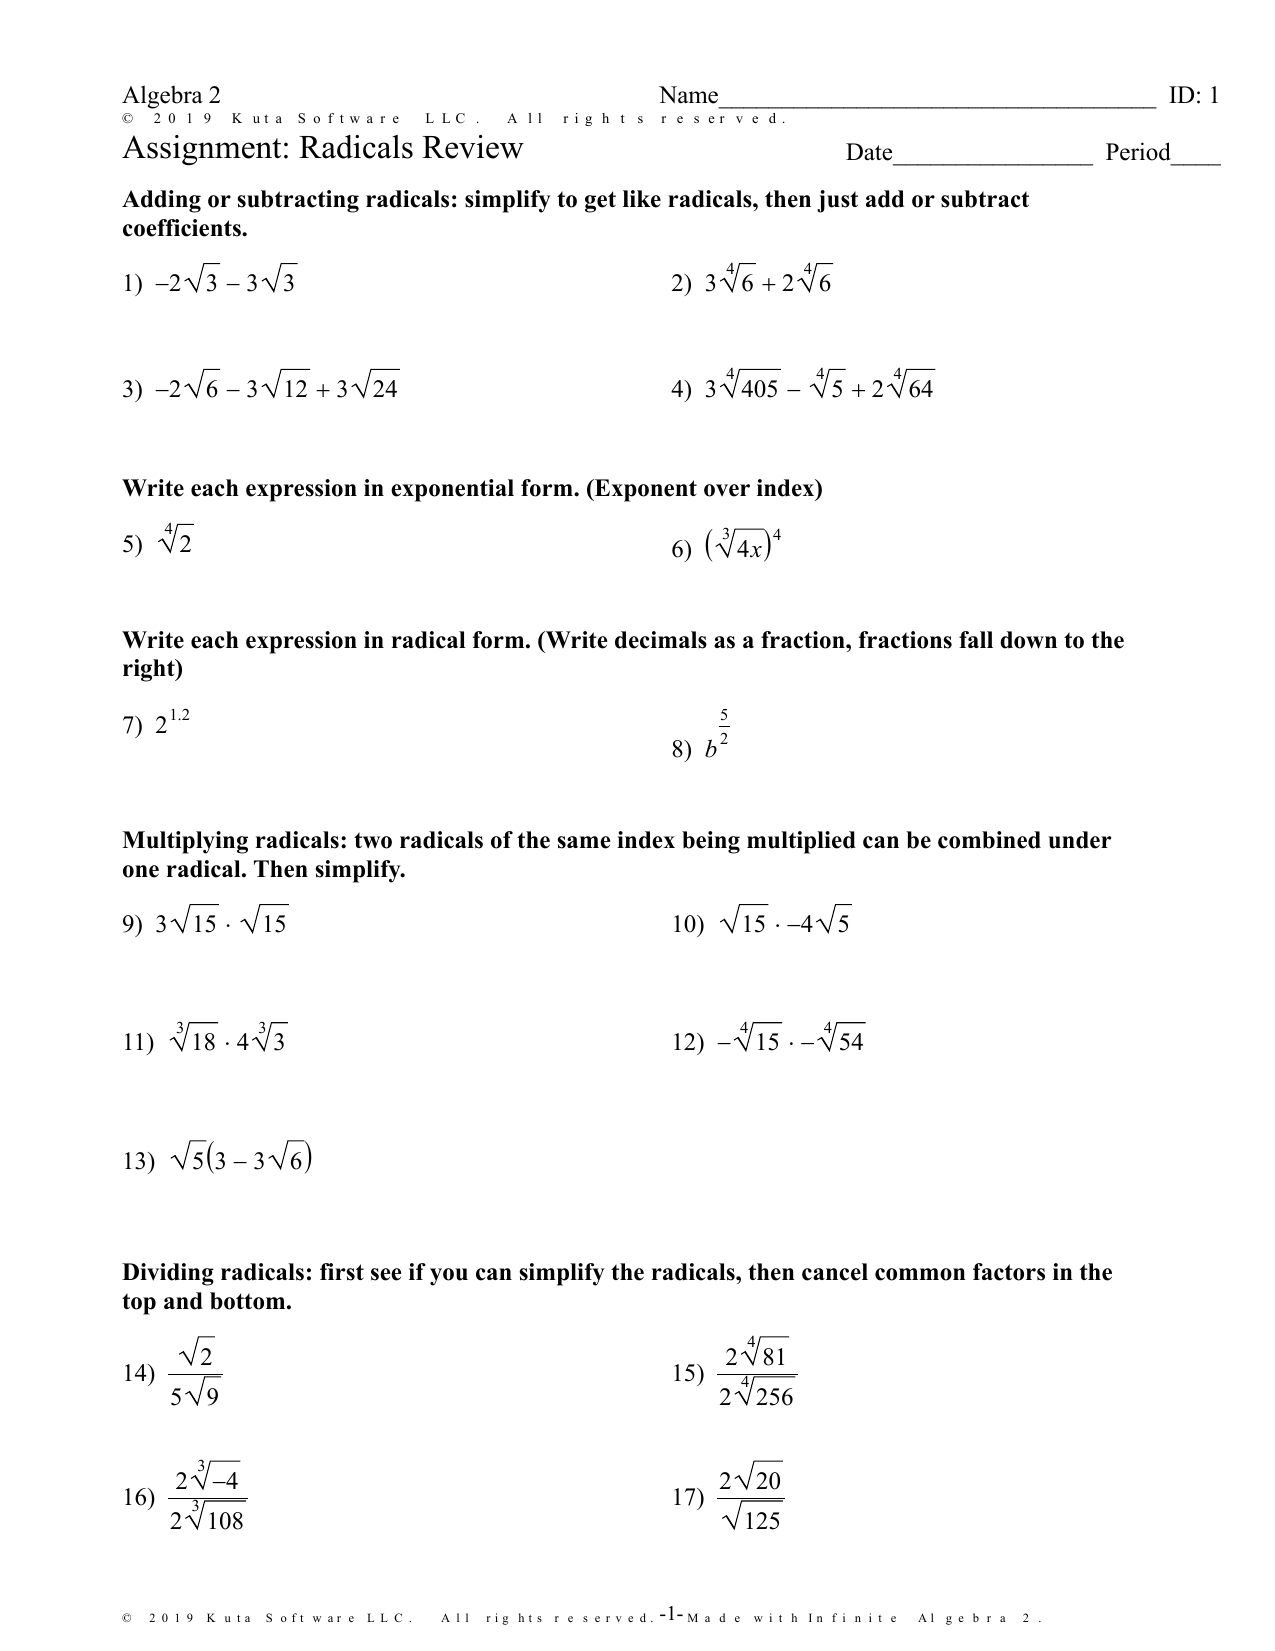 Radicals and Rational Exponents Review For Radicals And Rational Exponents Worksheet